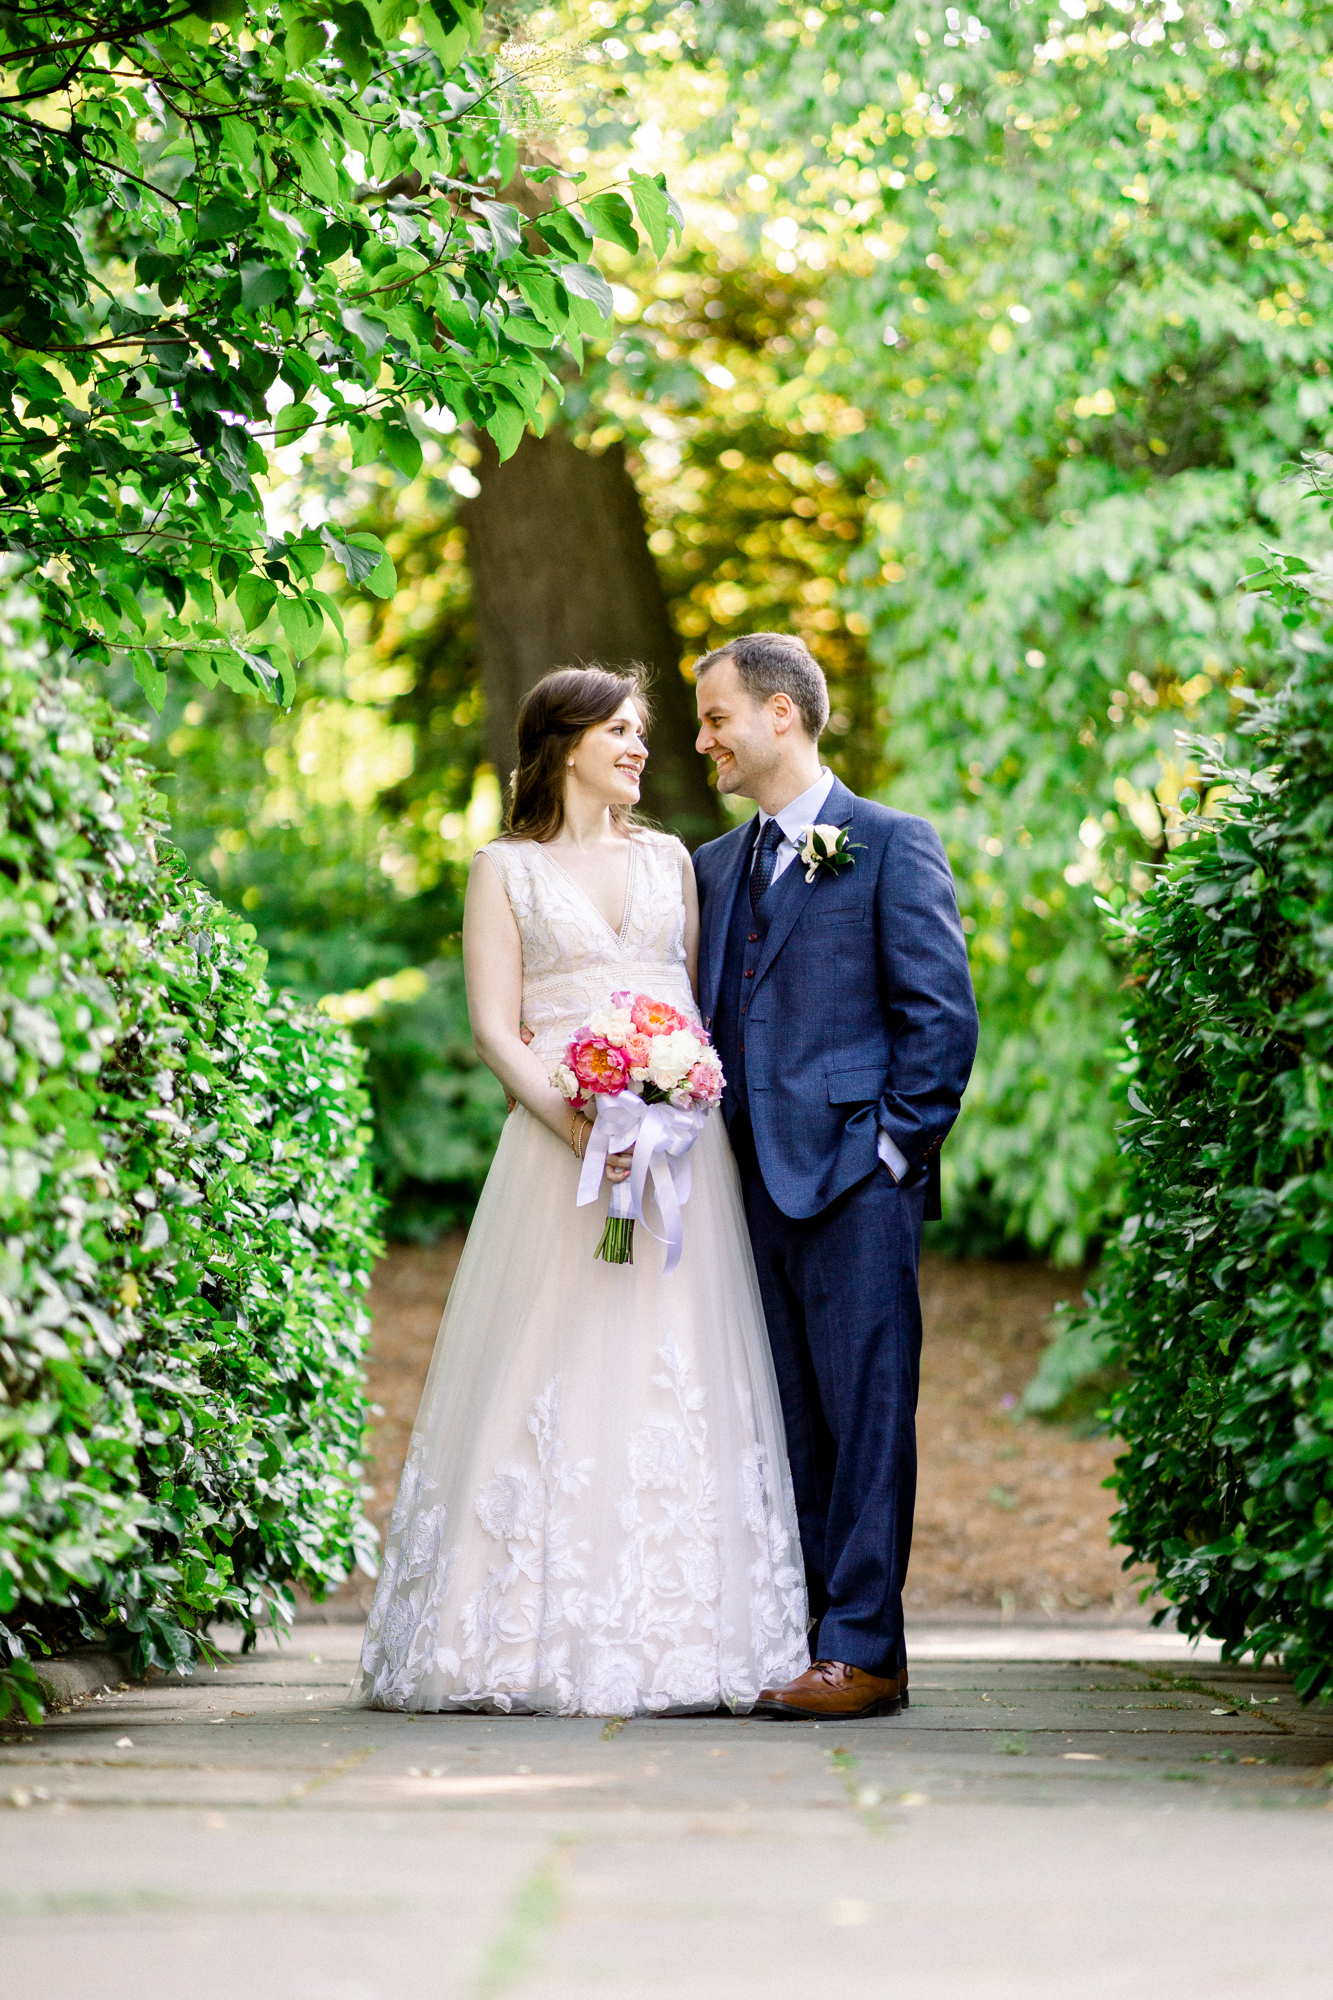 Glowing Summer Wedding Photos at the Conservatory Garden in Central Park New York